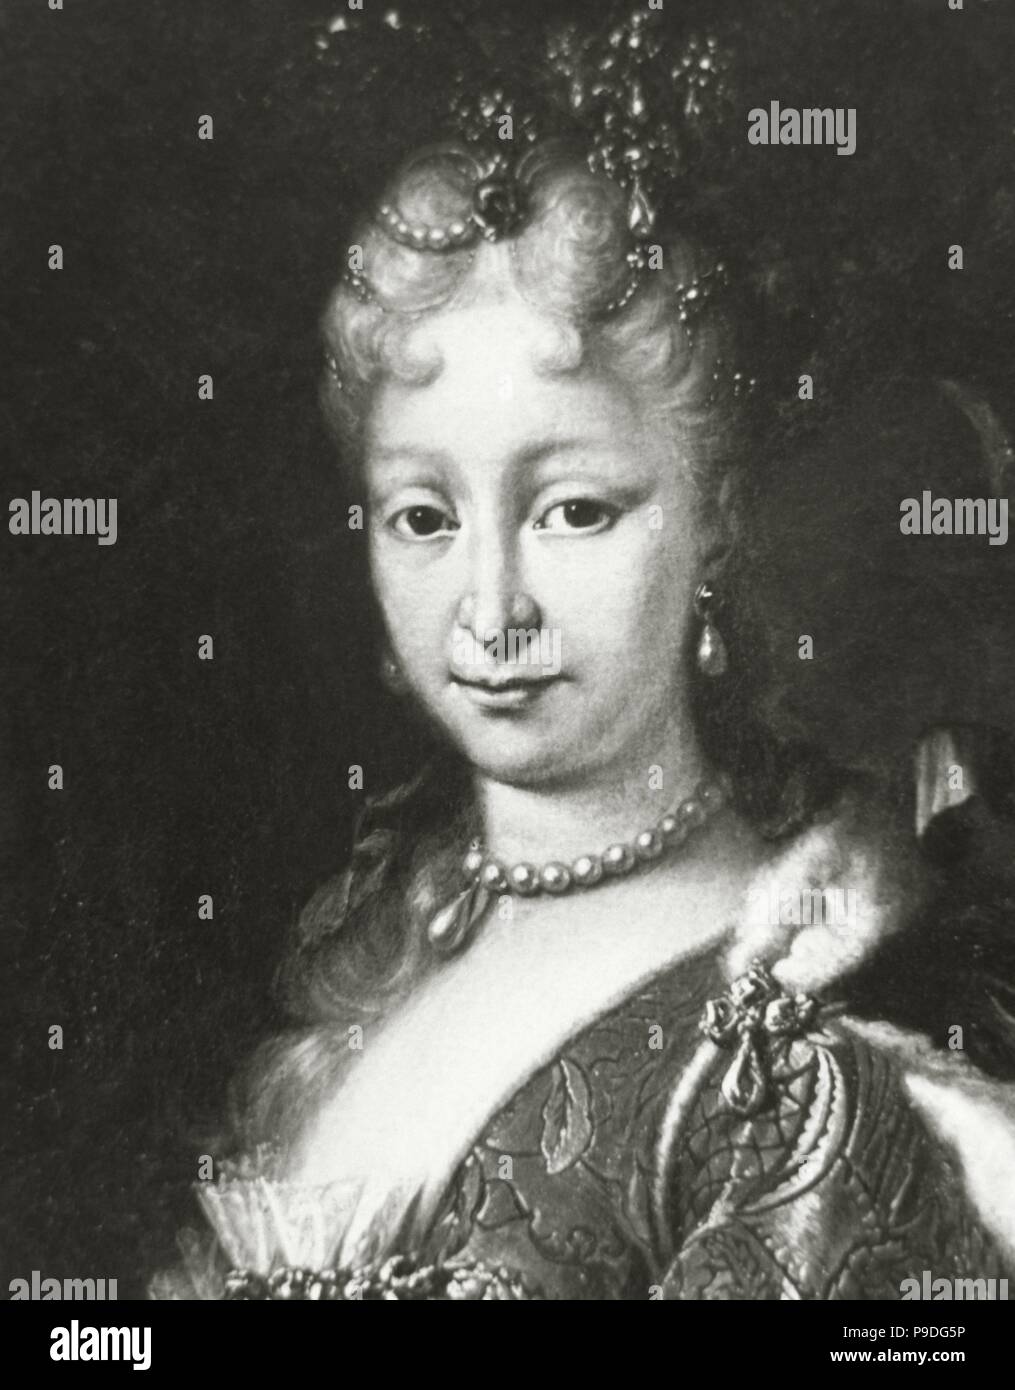 Elisabeth Farnese (1692-1766). Queen consort of Spain, wife of Philip V. Portrait. Engraving. Stock Photo